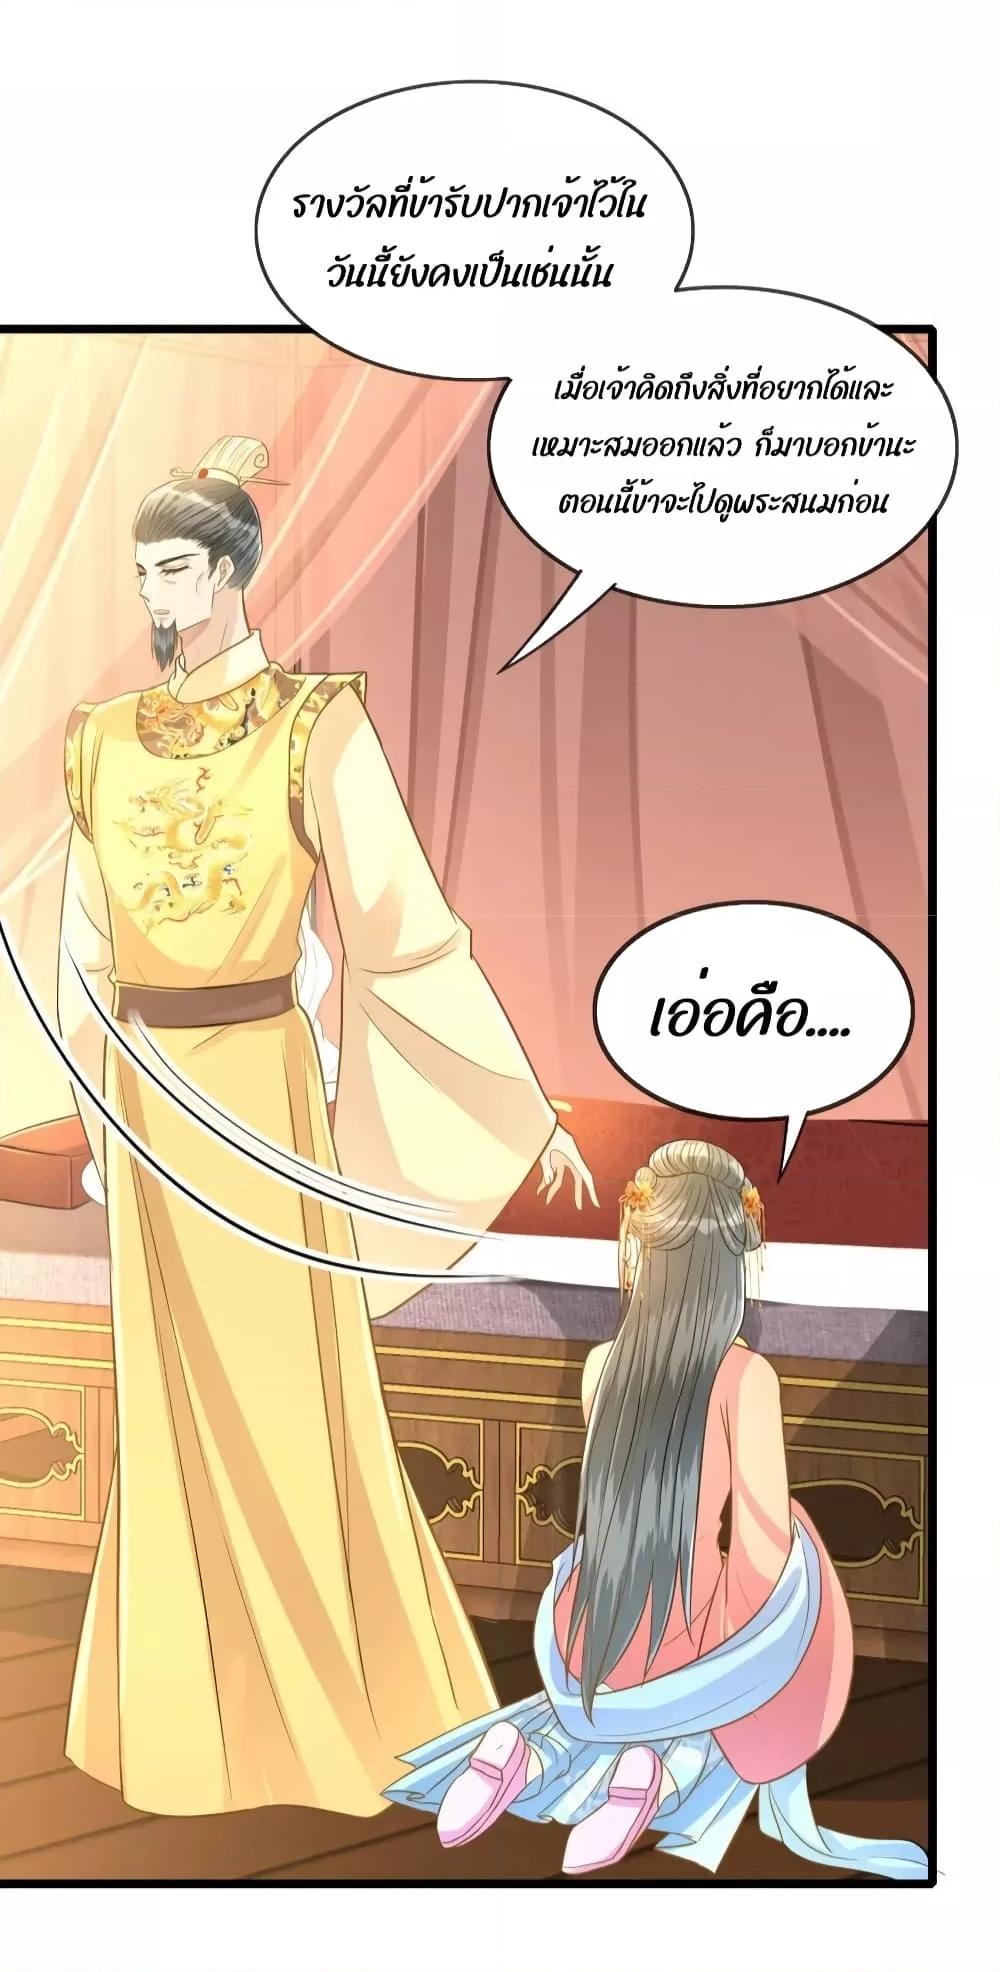 But what if His Royal Highness is the substitute โ€“ เธซเธฒเธเน€เธเธฒเน€เธเนเธเนเธเนเธ•เธฑเธงเนเธ—เธเธญเธเธเนเธฃเธฑเธเธ—เธฒเธขเธฒเธ—เธฅเนเธฐ เธ•เธญเธเธ—เธตเน 13 (6)